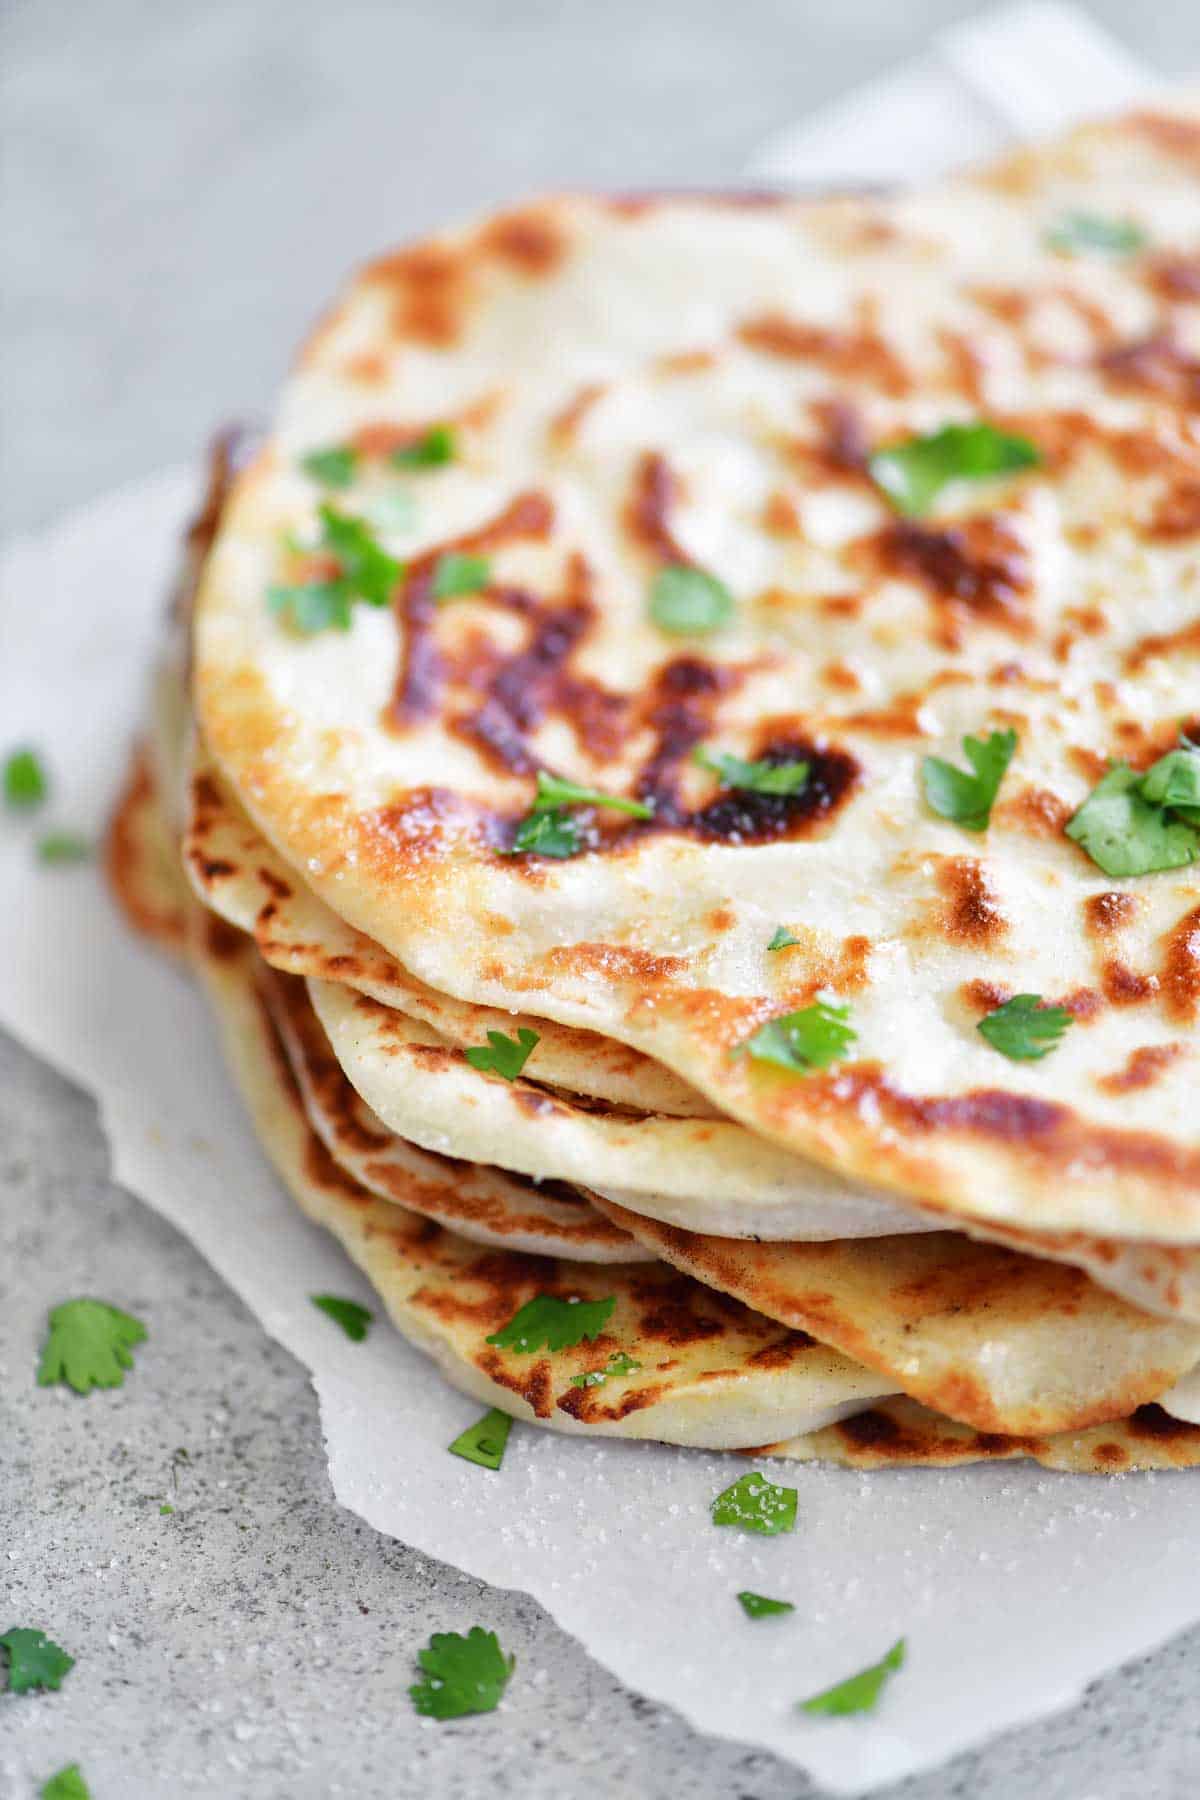 naan flatbread made from two ingredient dough